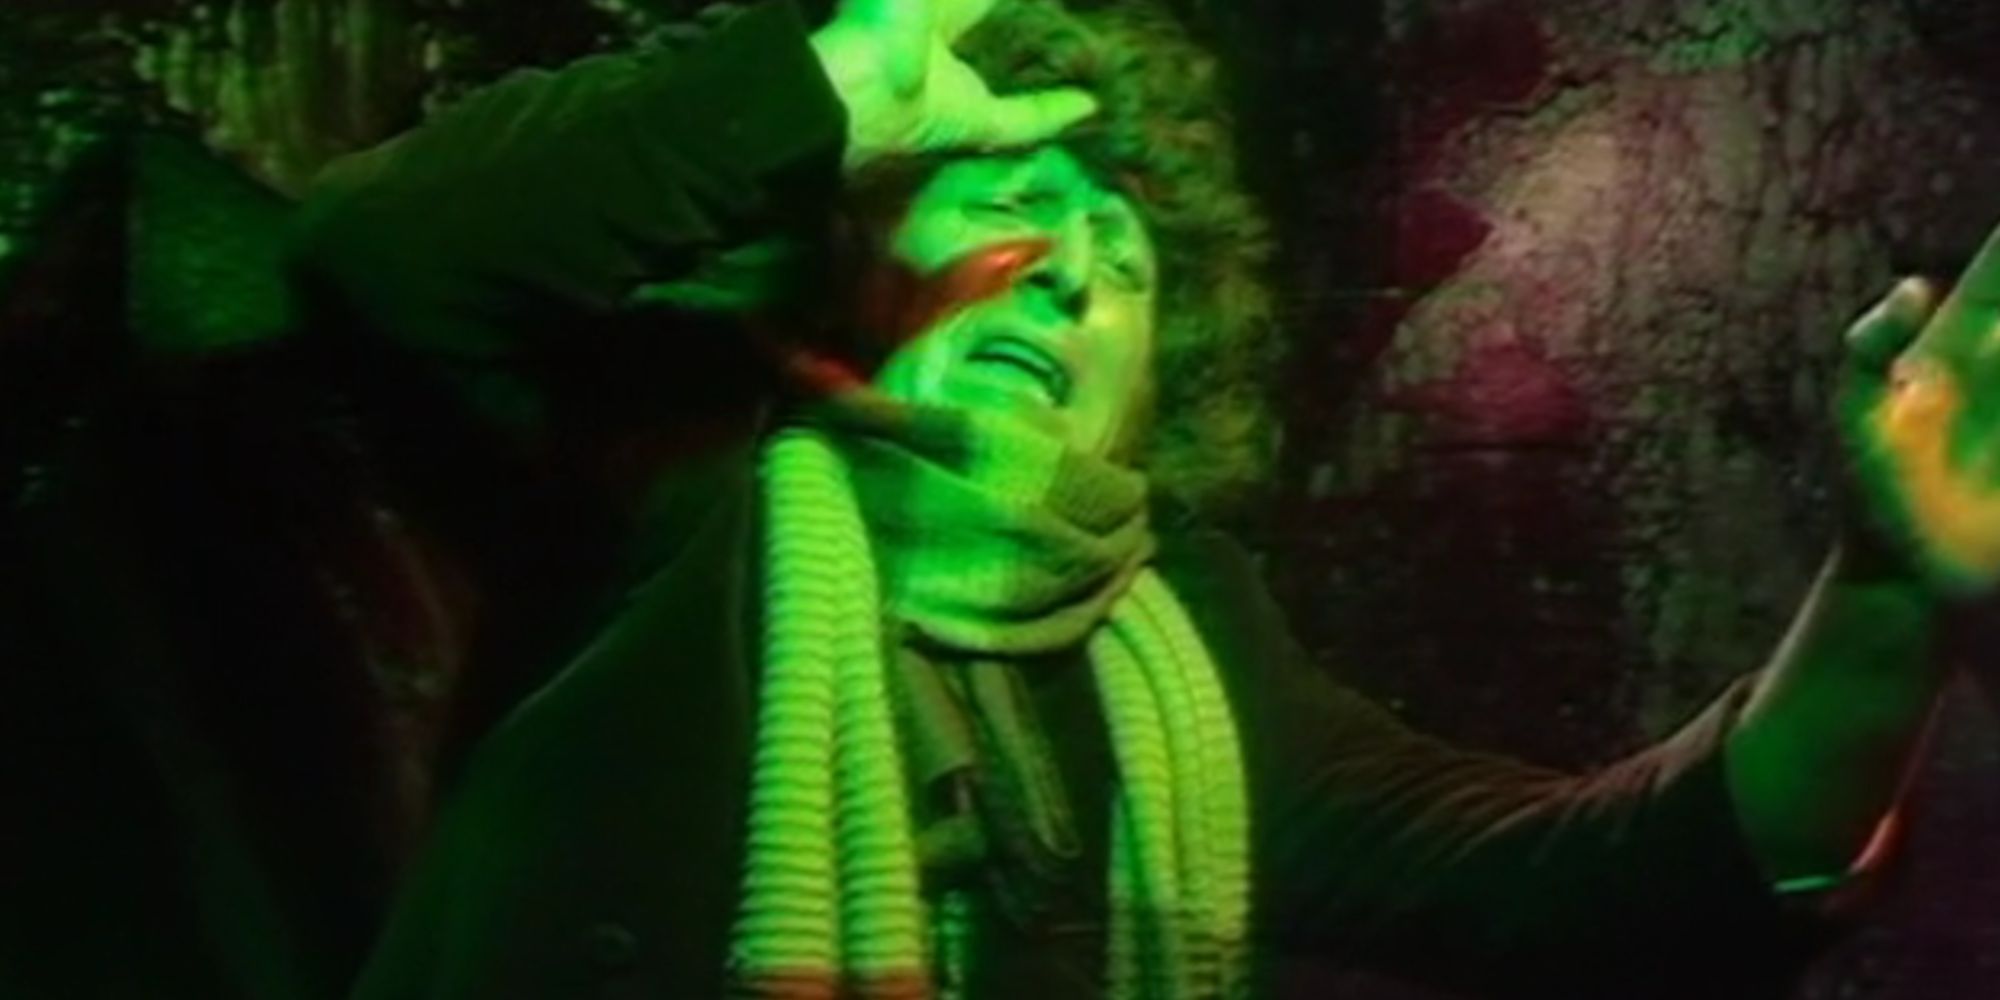 Tom Baker bathed in green light looking afraid as the Fourth Doctor in Doctor Who